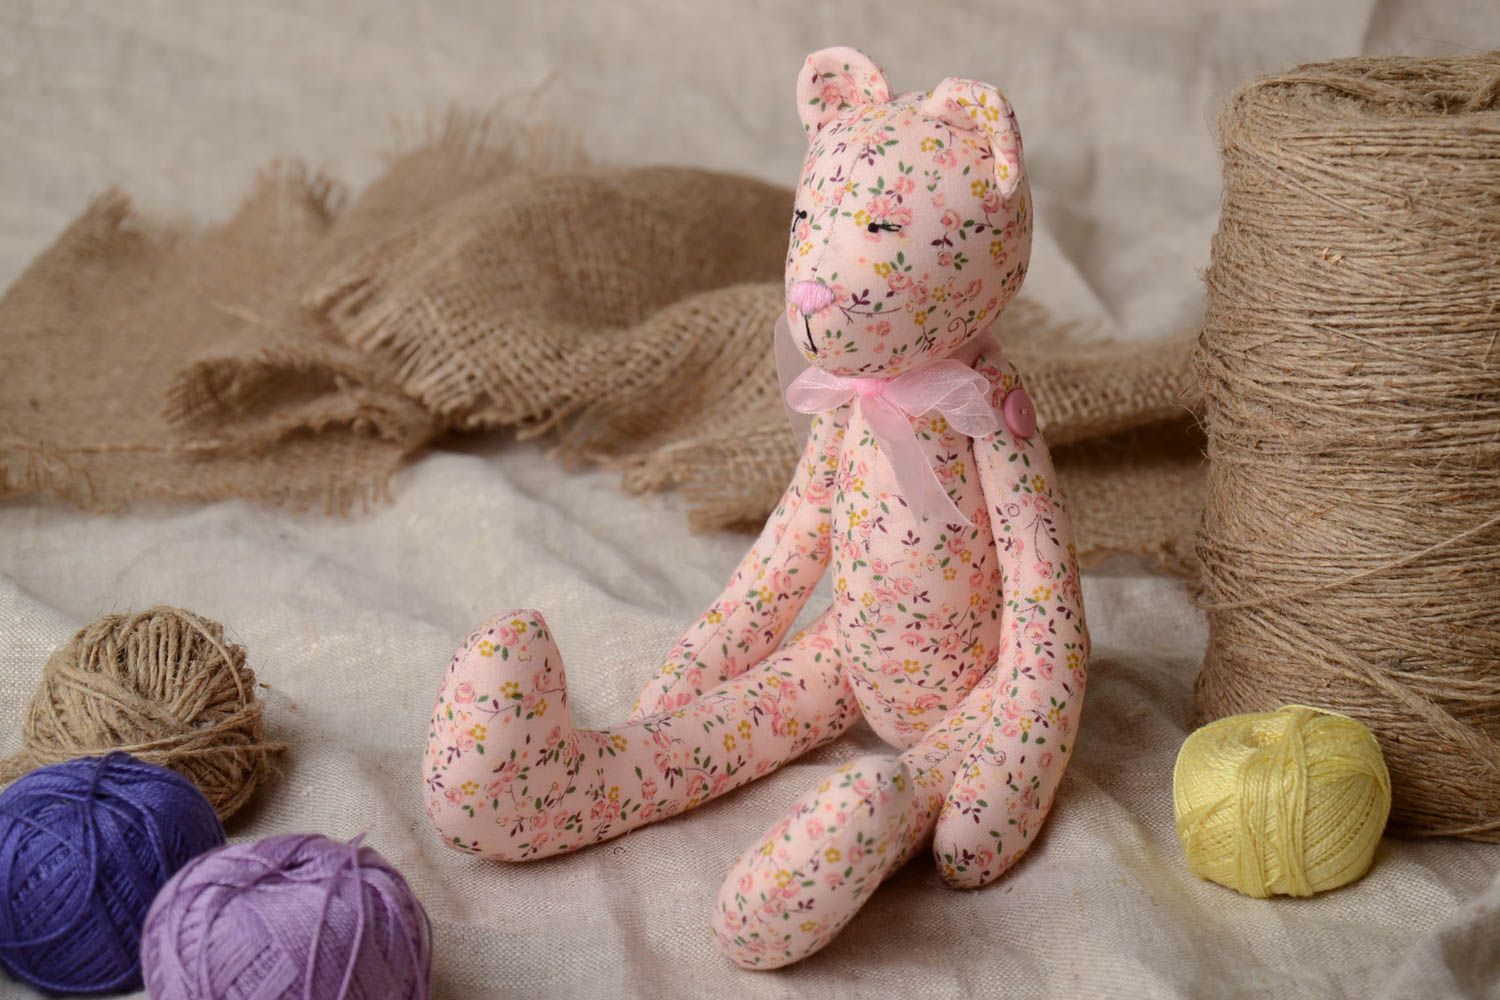 Handmade designer soft toy sewn of tender pink floral cotton fabric bear photo 1